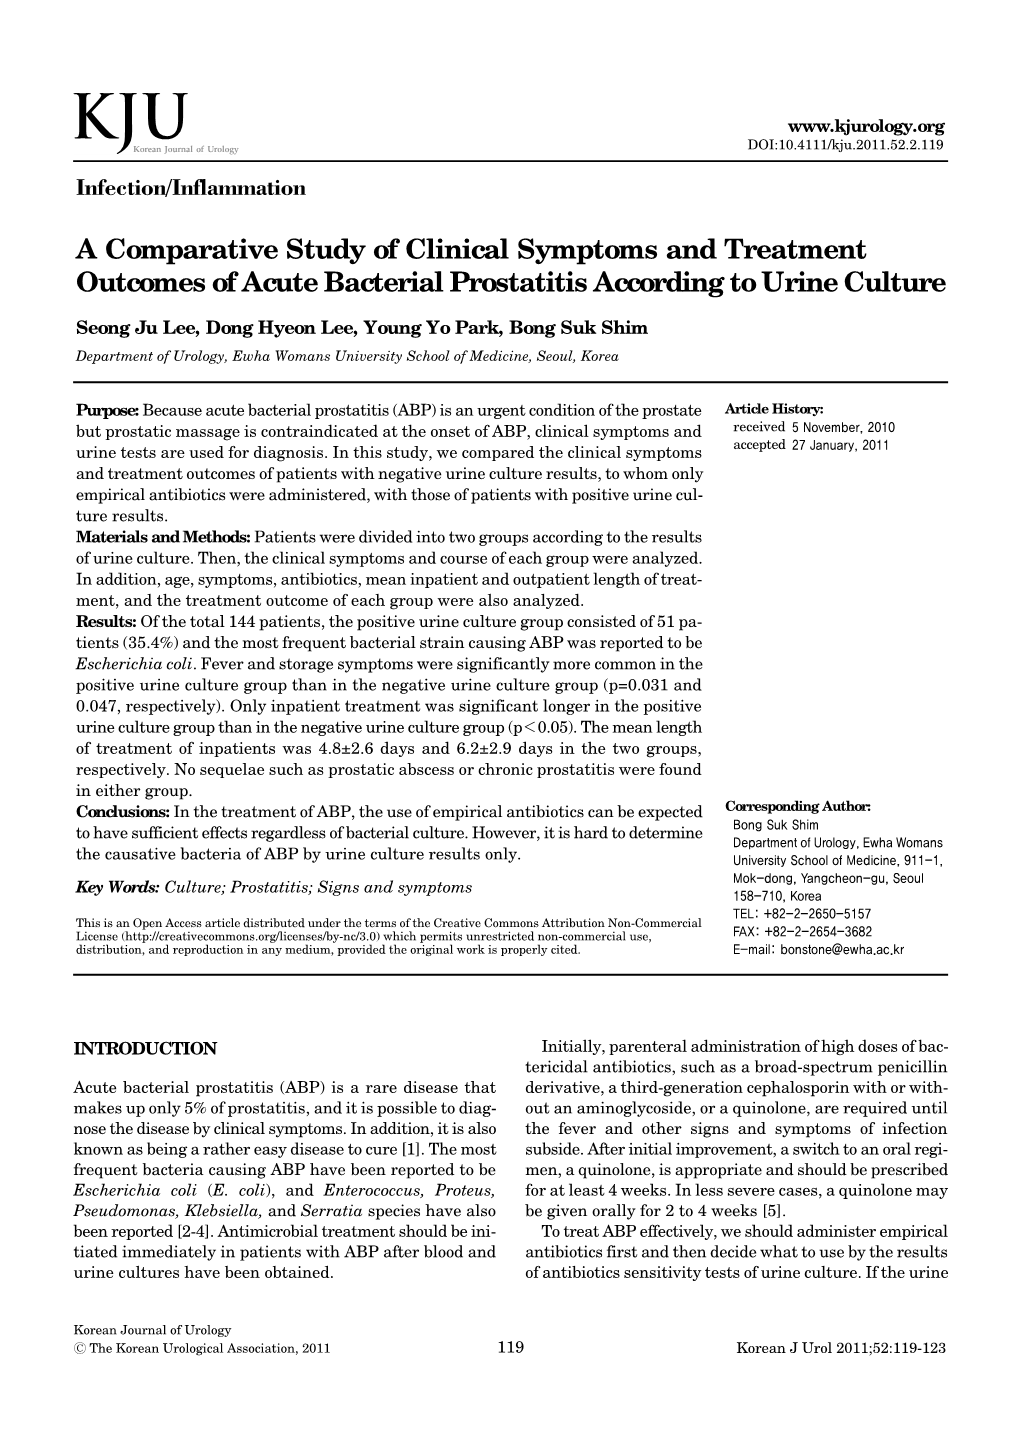 A Comparative Study of Clinical Symptoms and Treatment Outcomes of Acute Bacterial Prostatitis According to Urine Culture